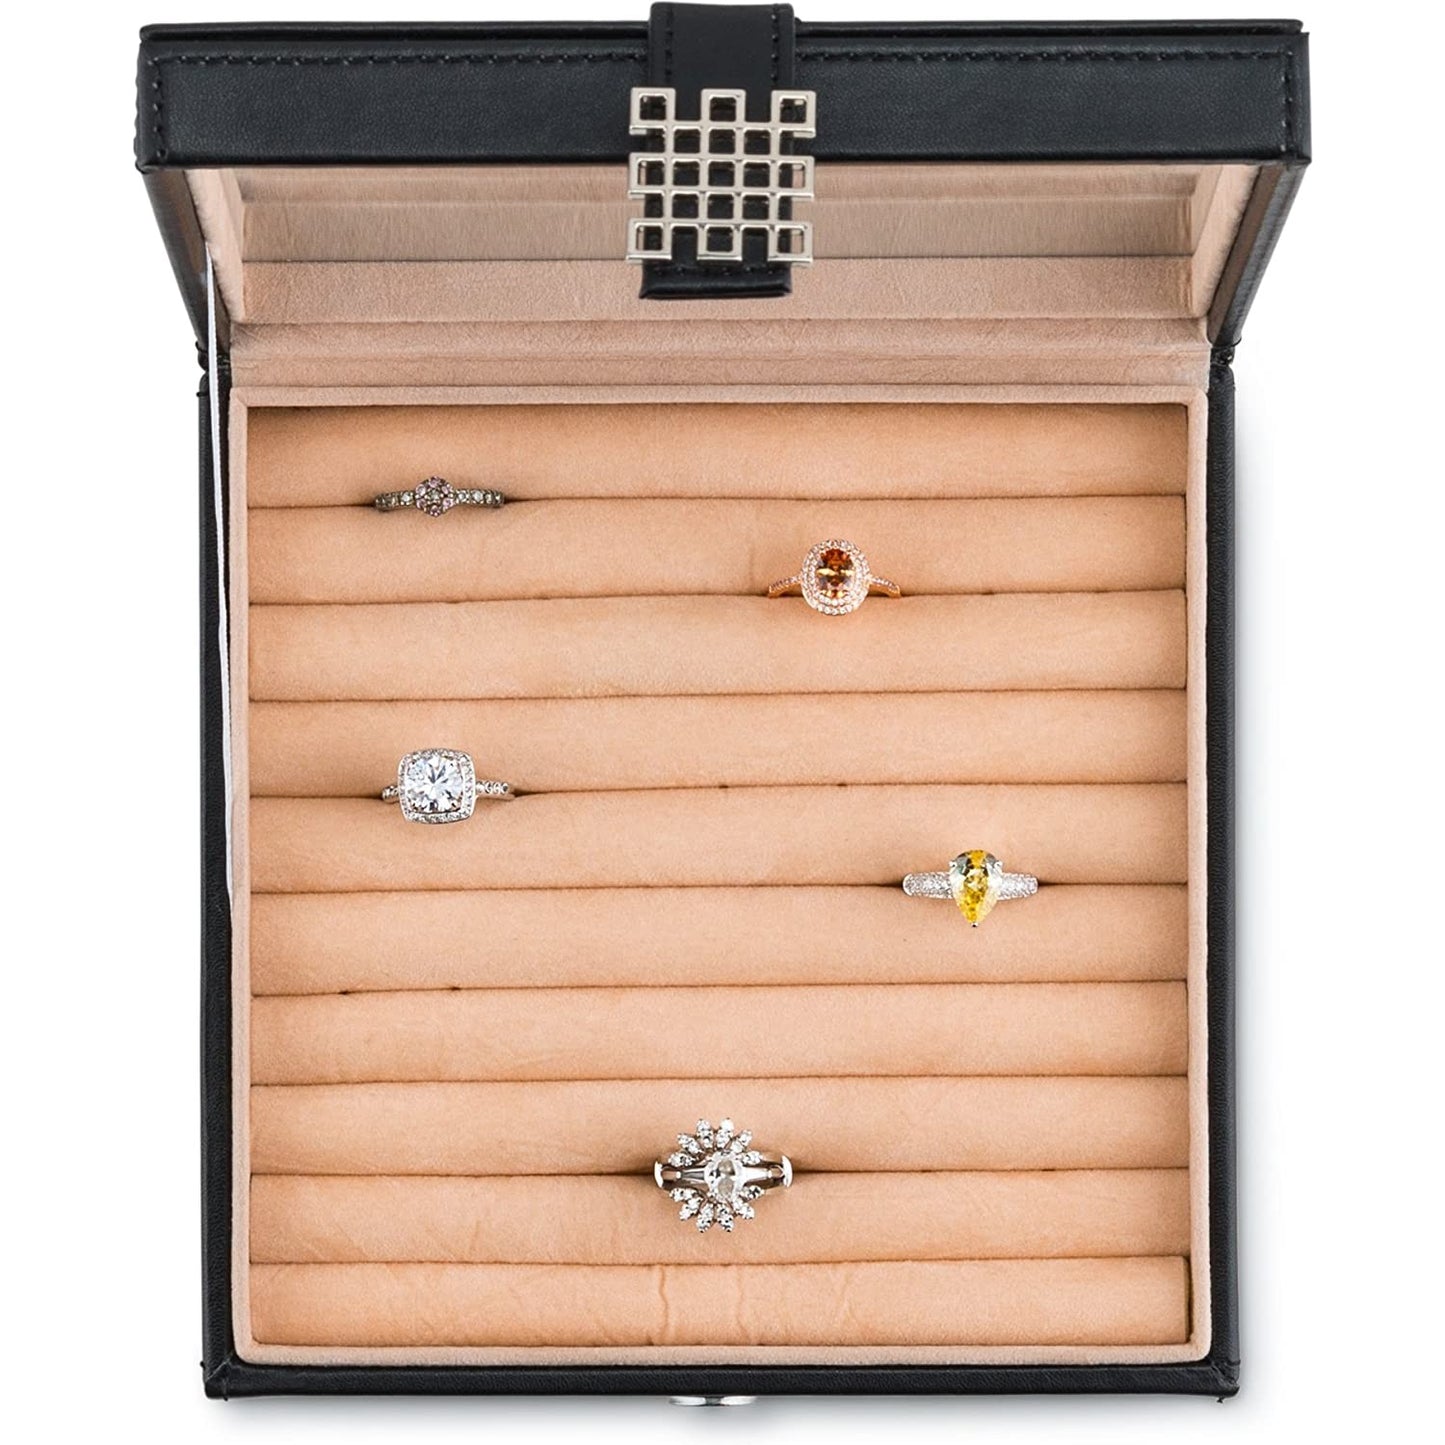 A view from above of a black ring box organizer with rings inside.